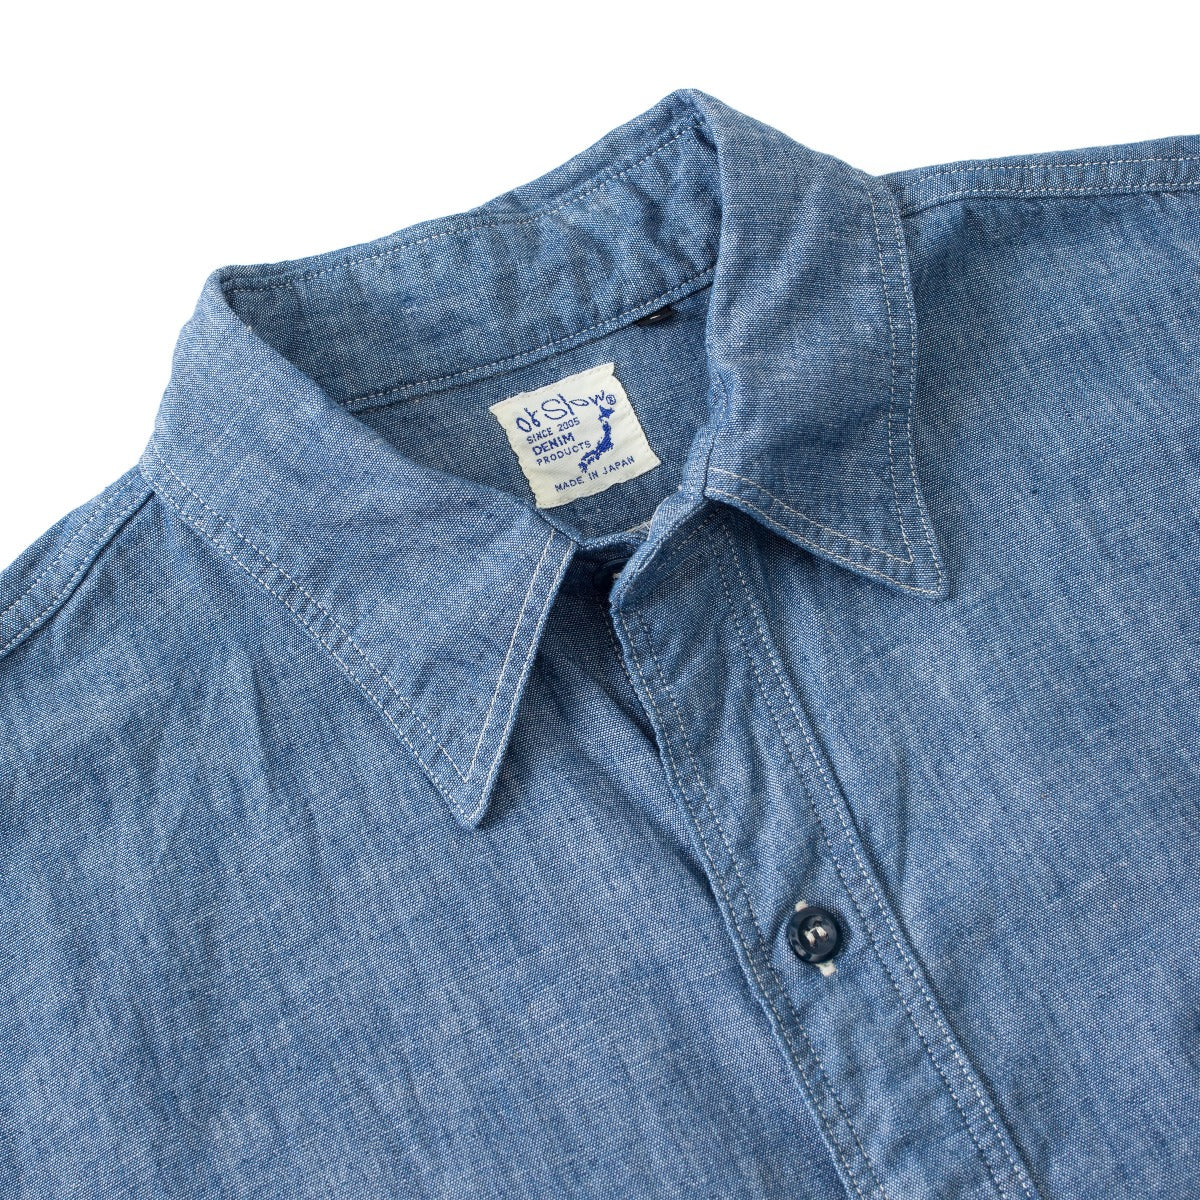 Vintage Fit Chambray Work Shirt